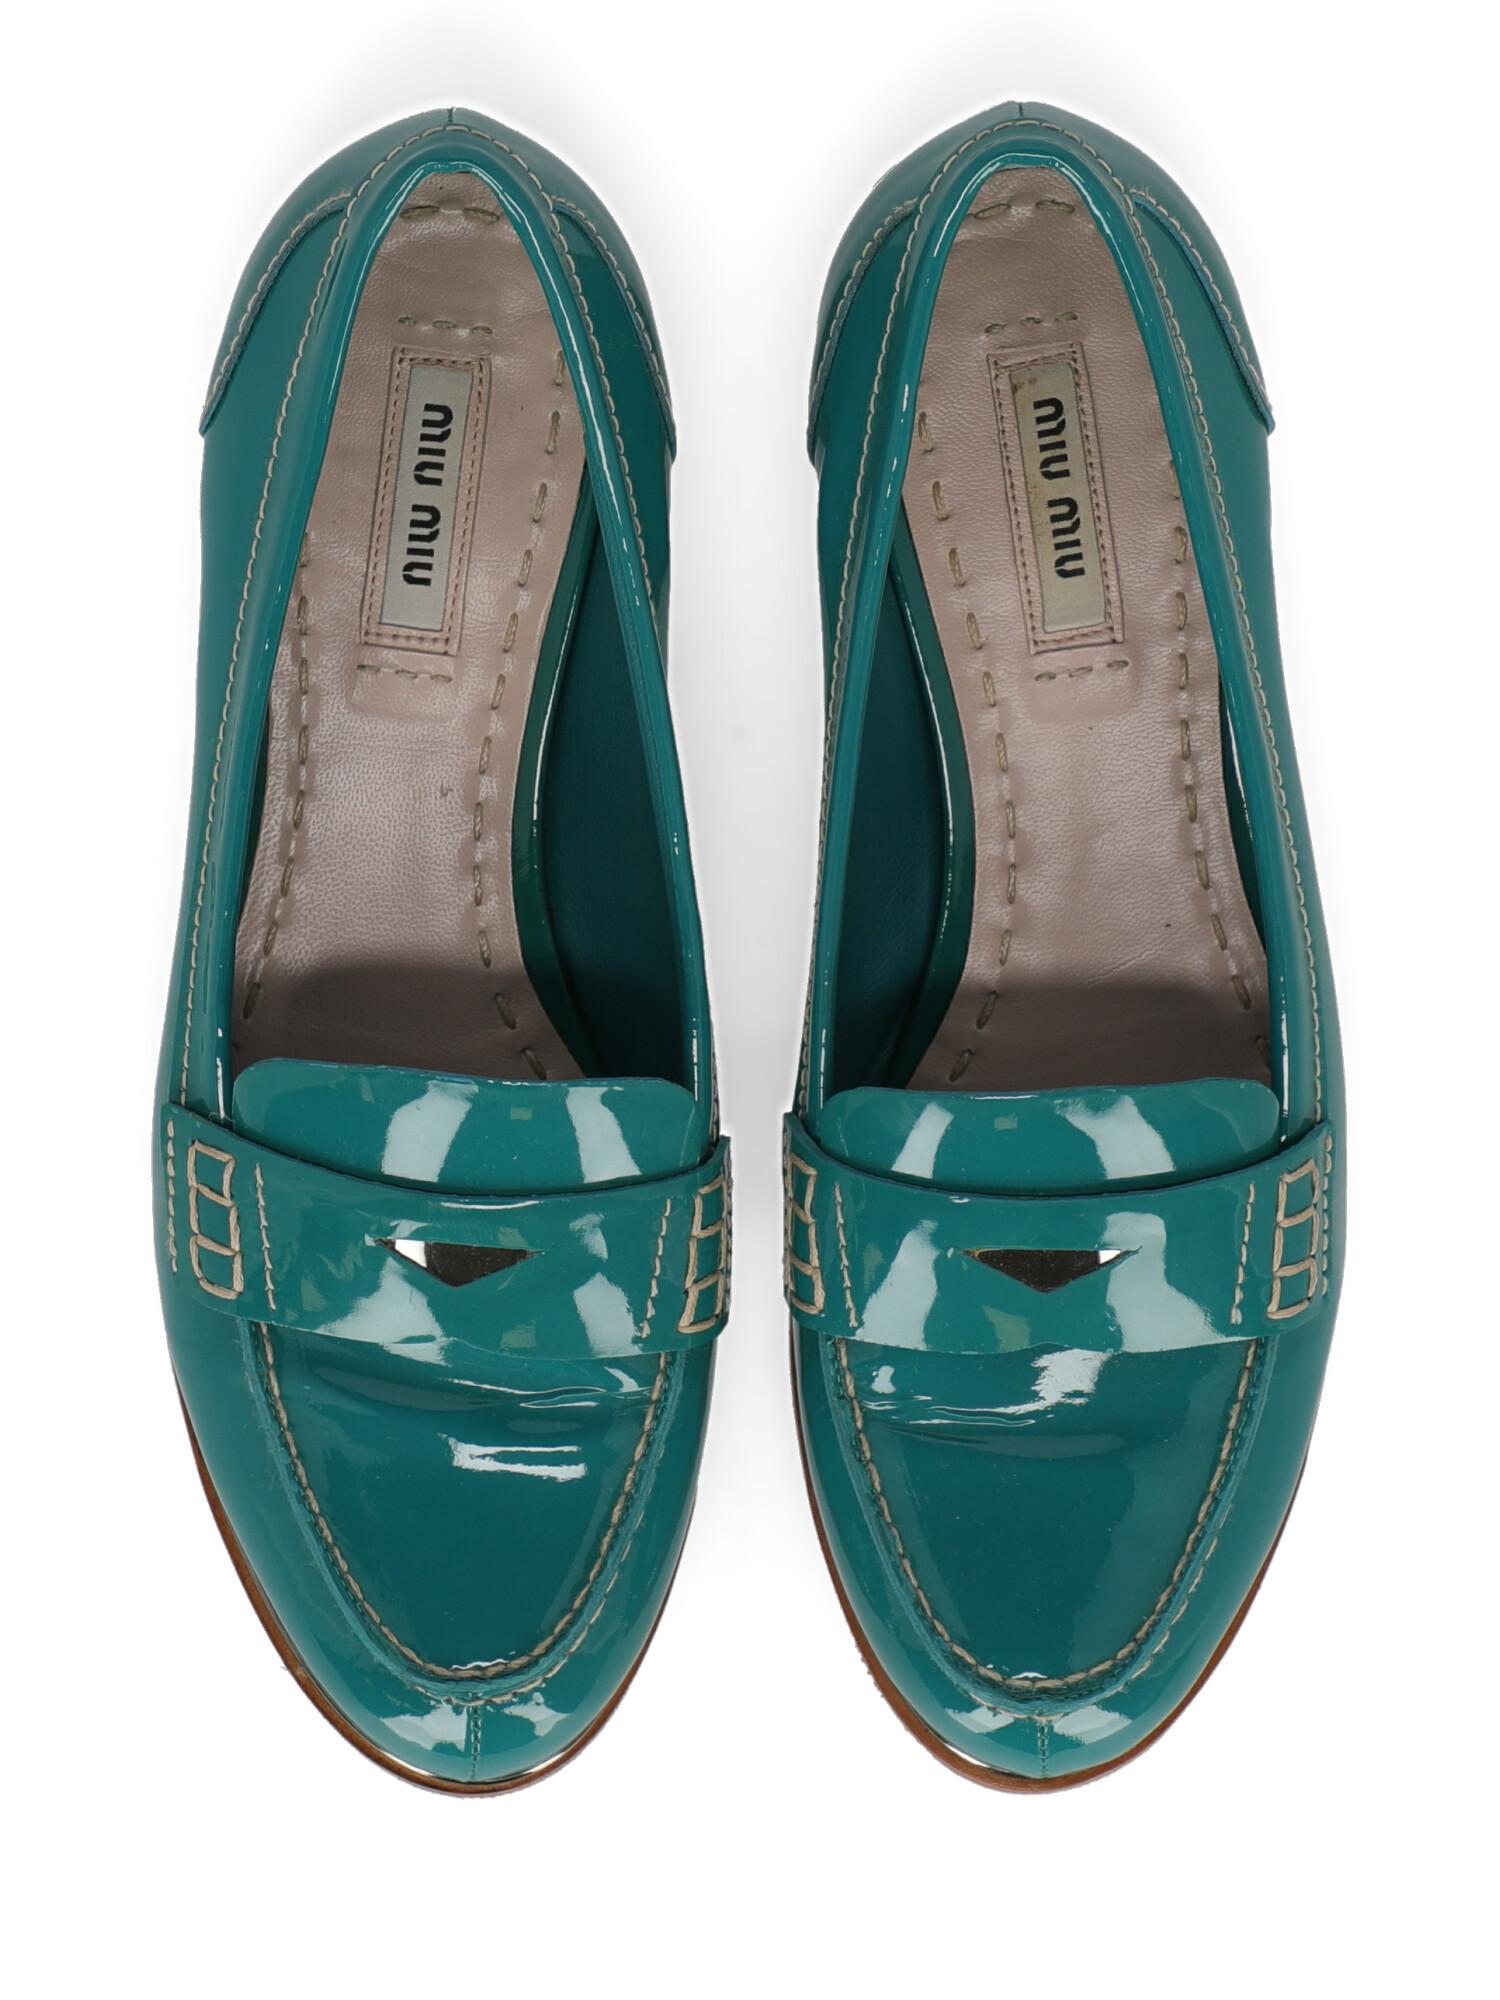 Miu Miu Woman Loafers Green Leather IT 37.5 For Sale 1